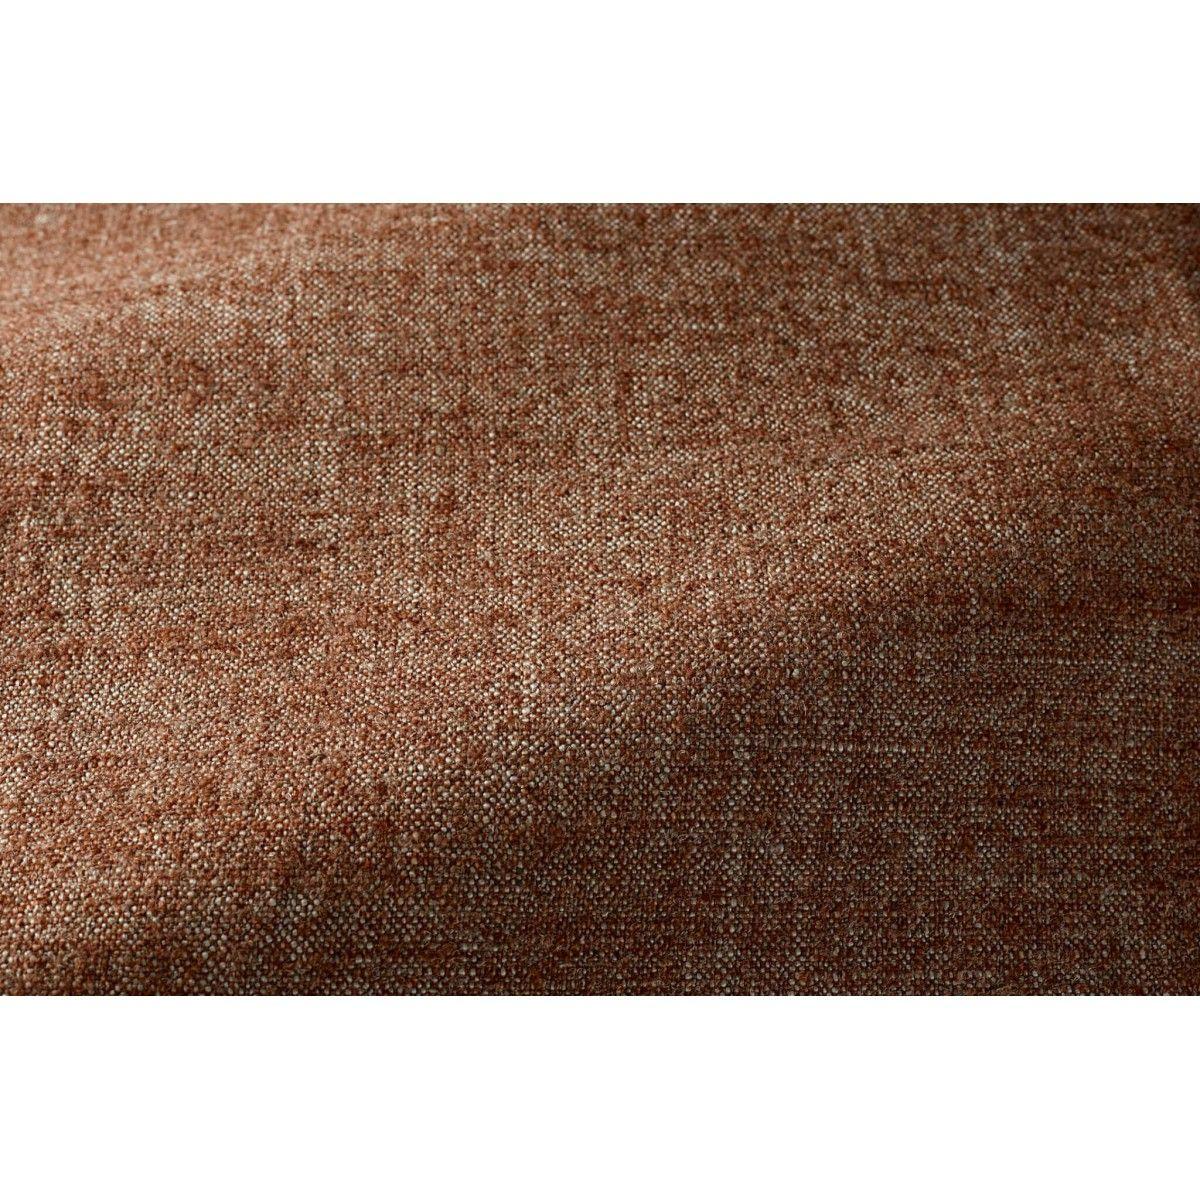 Popus Editions Giovanna 3 seater sofa in Terracotta London Linen Fabric

Giovanna is a sofa with a strong profile. A sober, plush line, with this famous detail that changes everything, so as not to forget its strength of character and this